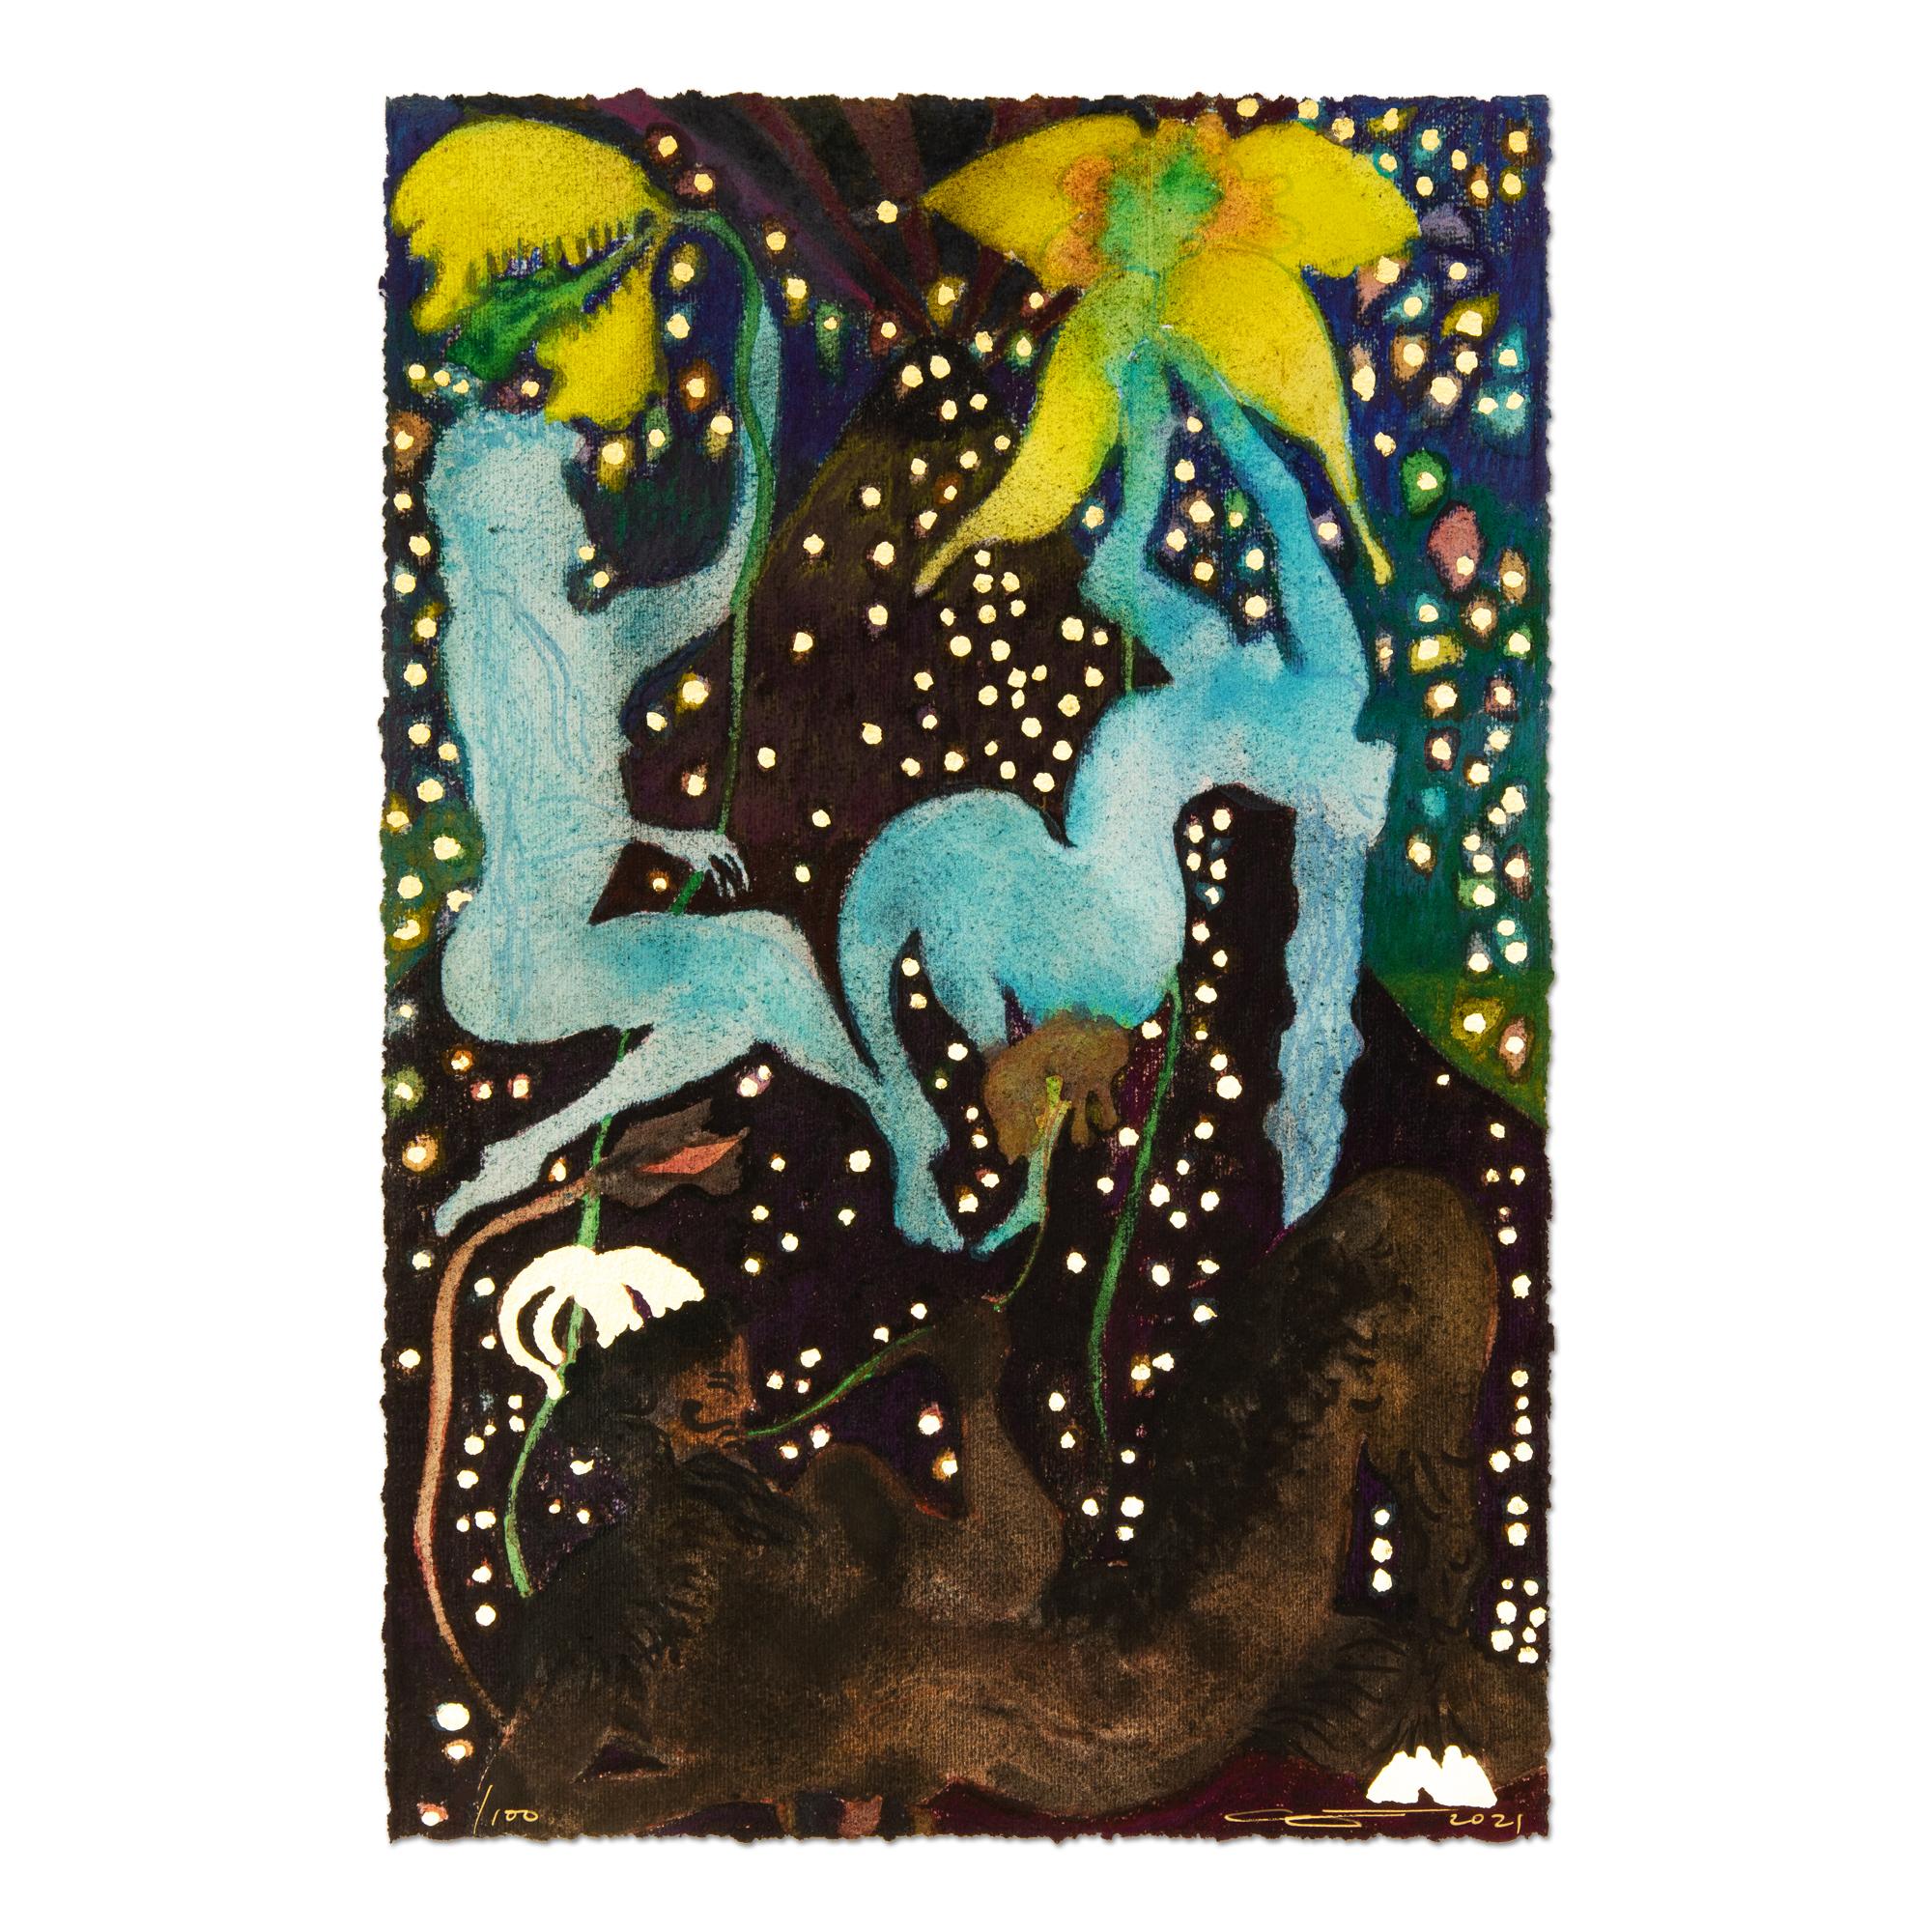 Chris Ofili (British, b. 1968)
Afternoon with La Soufrière (prelude 4), 2021
Medium: Digital pigment print and gold leaf on Somerset Velvet
Dimensions: 26.1 x 38.6 cm
Edition of 100 + 20 AP: Hand-signed and numbered